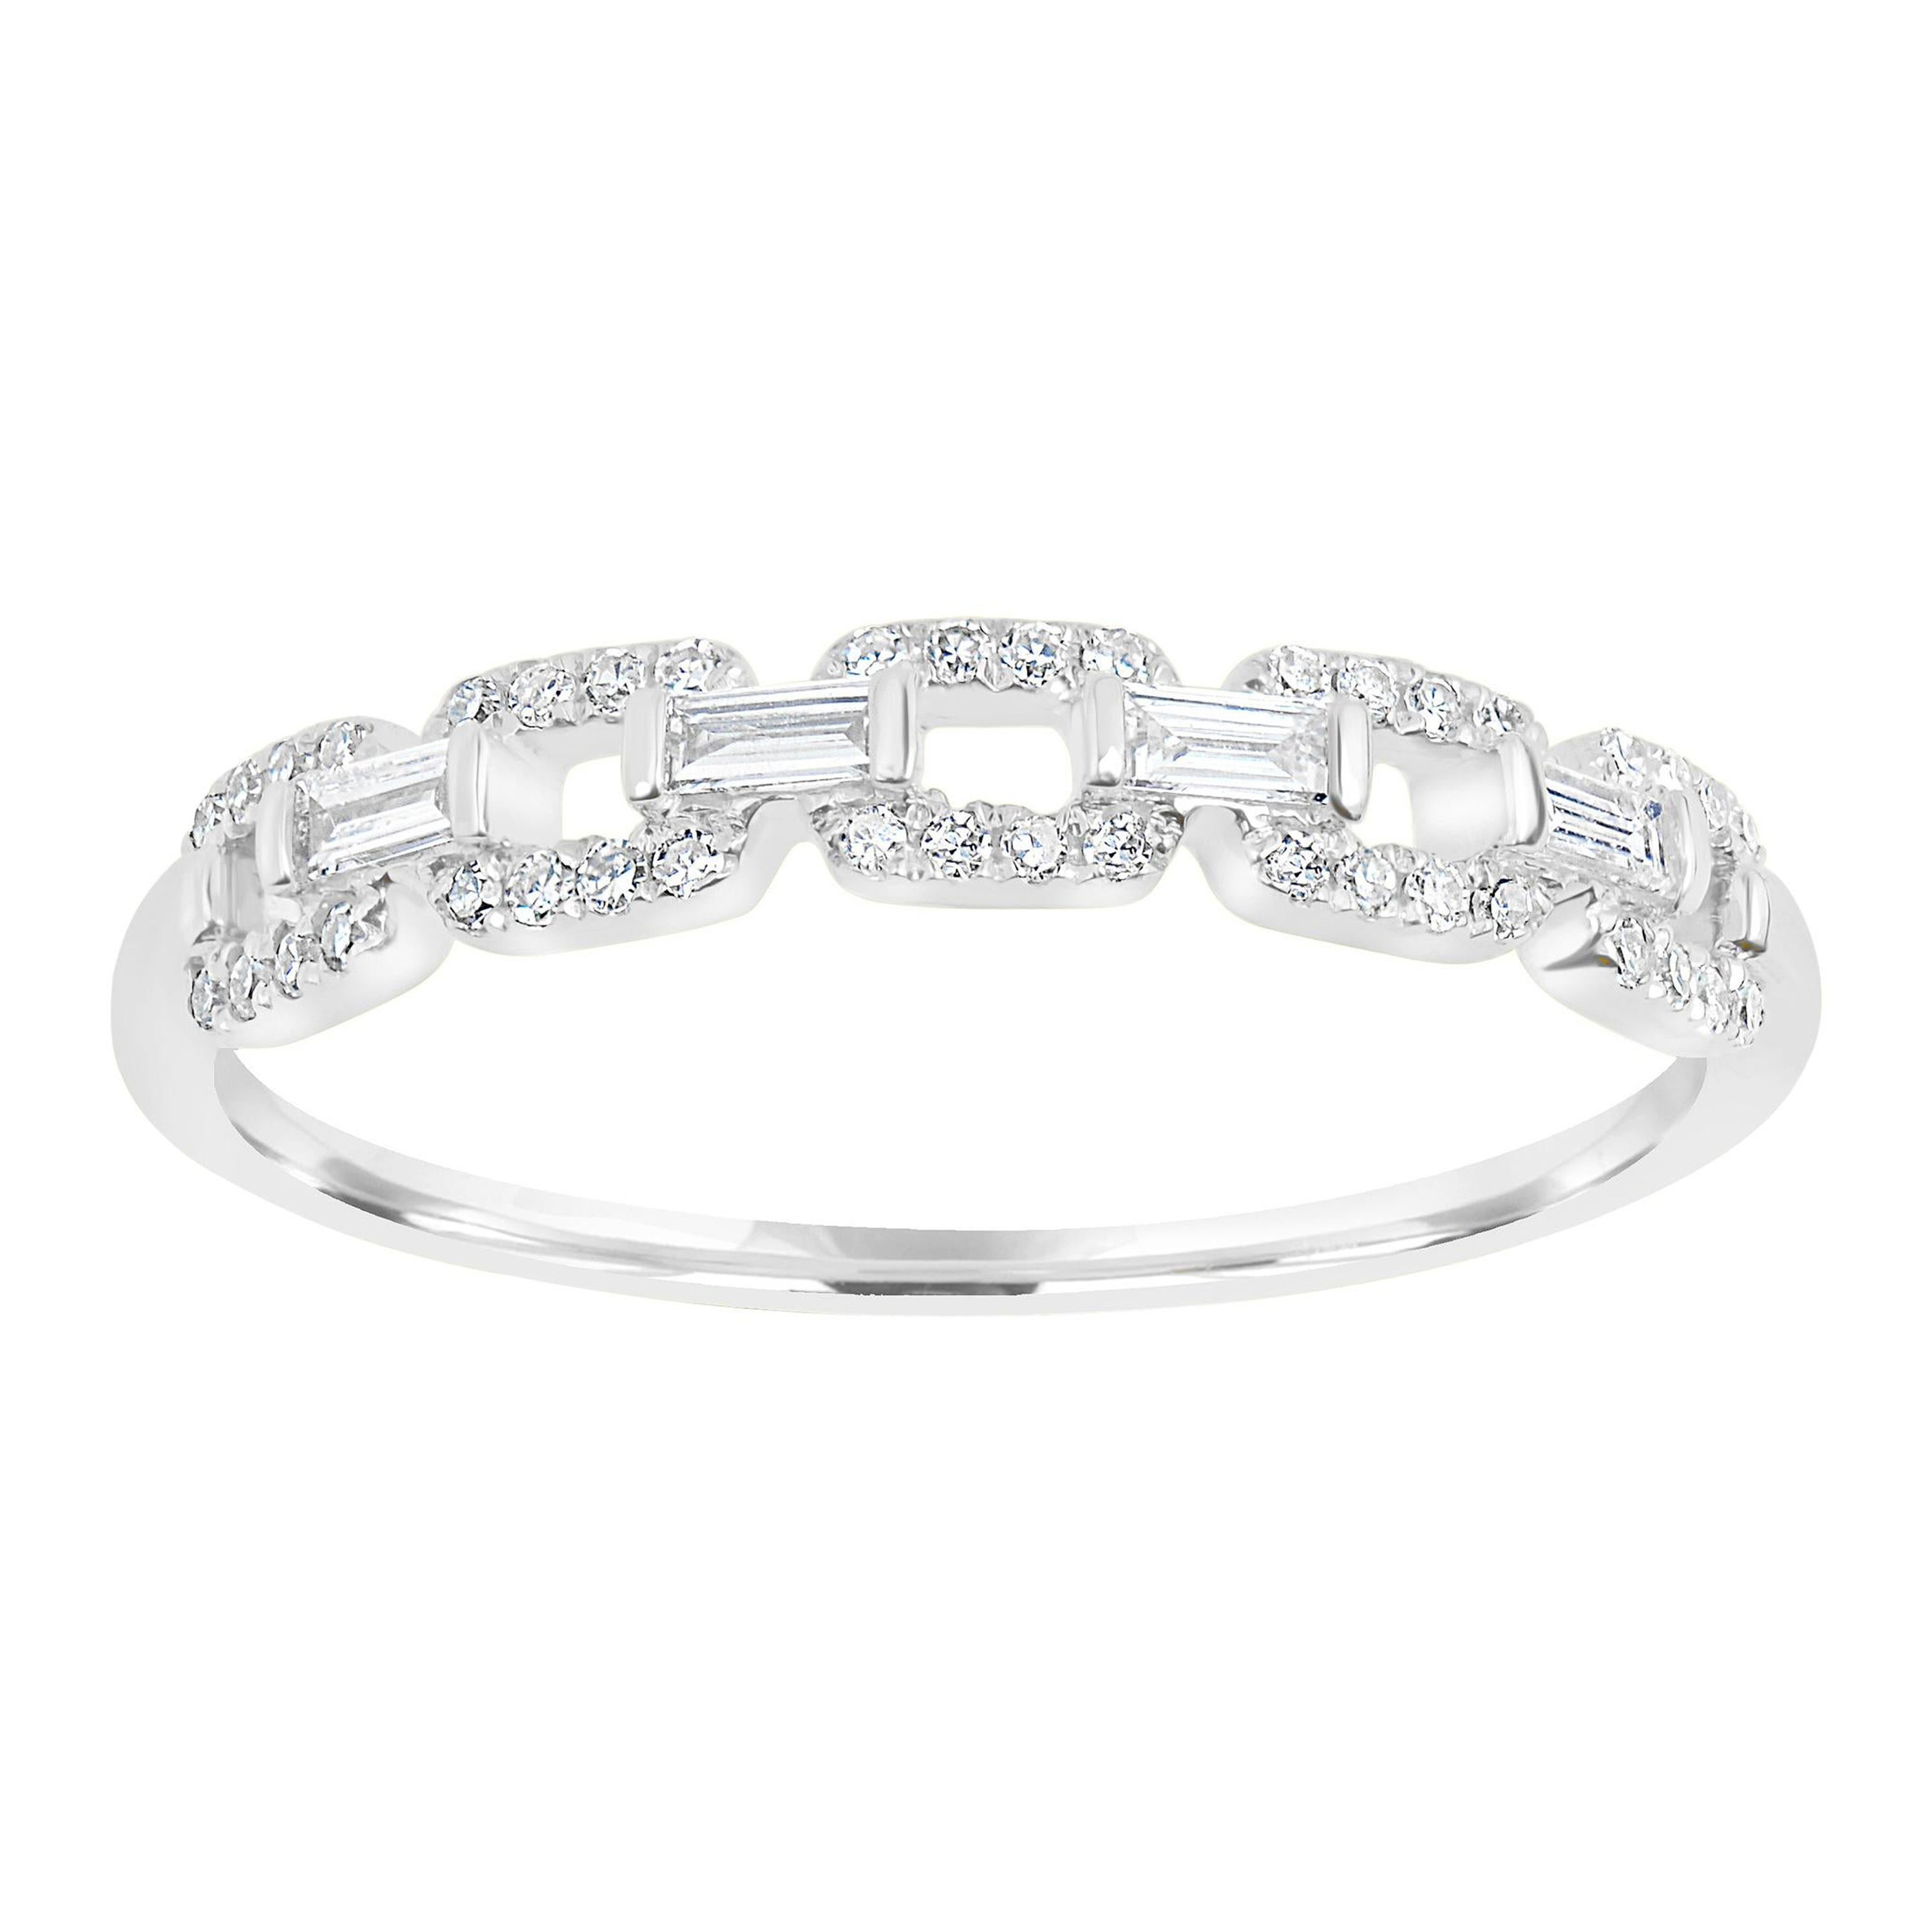 Luxle Round Pave Diamond Link Band Ring in 14k White Gold For Sale